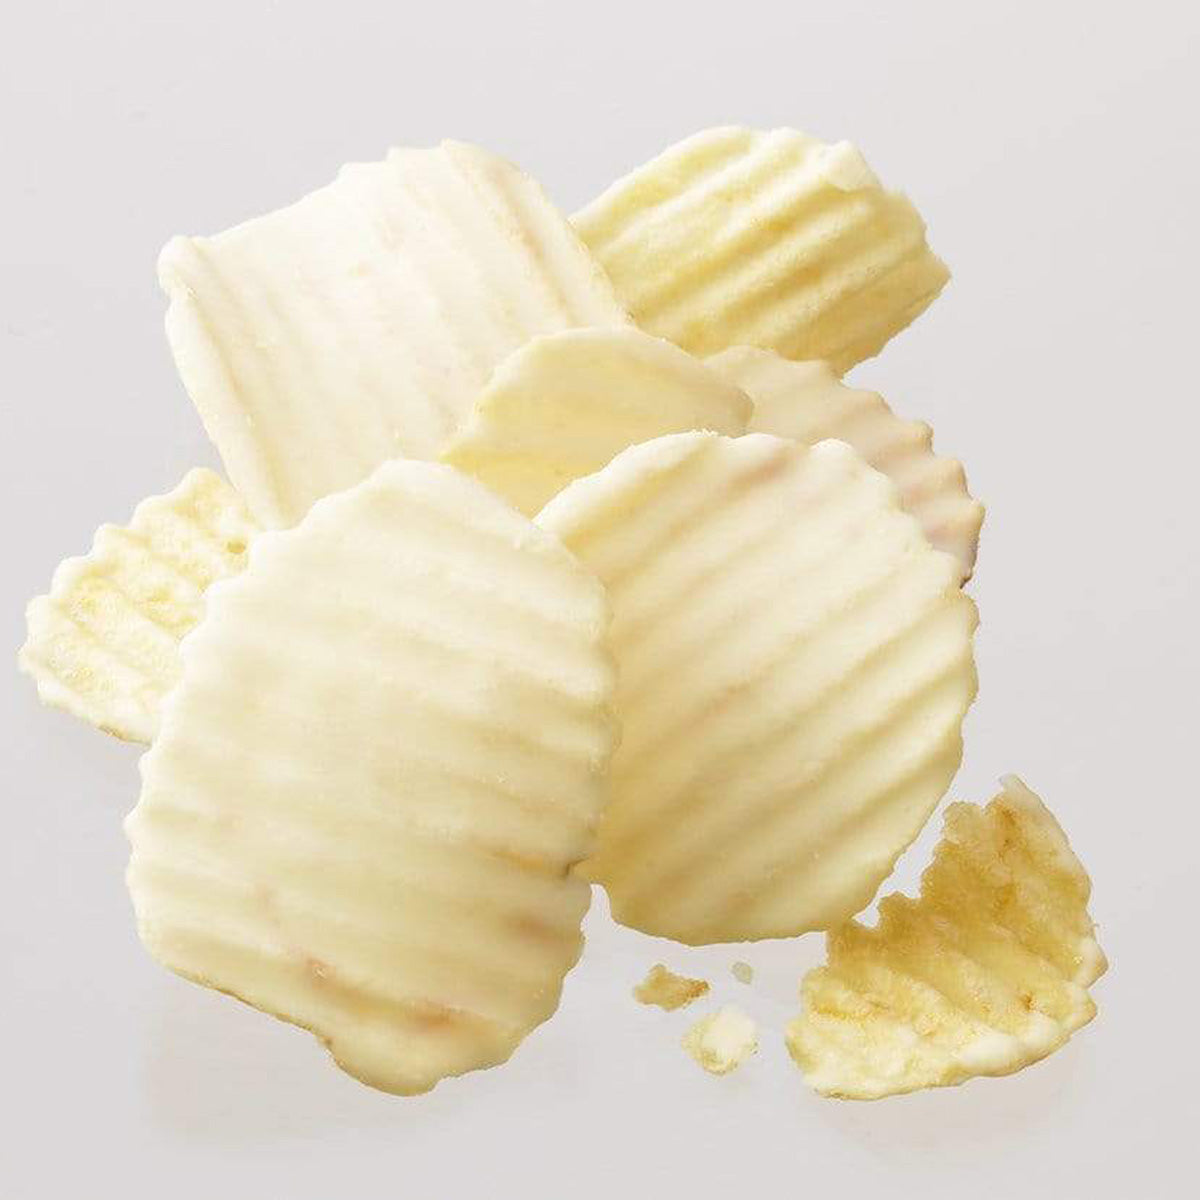 ROYCE' Chocolate - Potatochip Chocolate "Fromage Blanc" - Image shows white chocolate-coated potato chips with a ridged texture. Background is gray. 